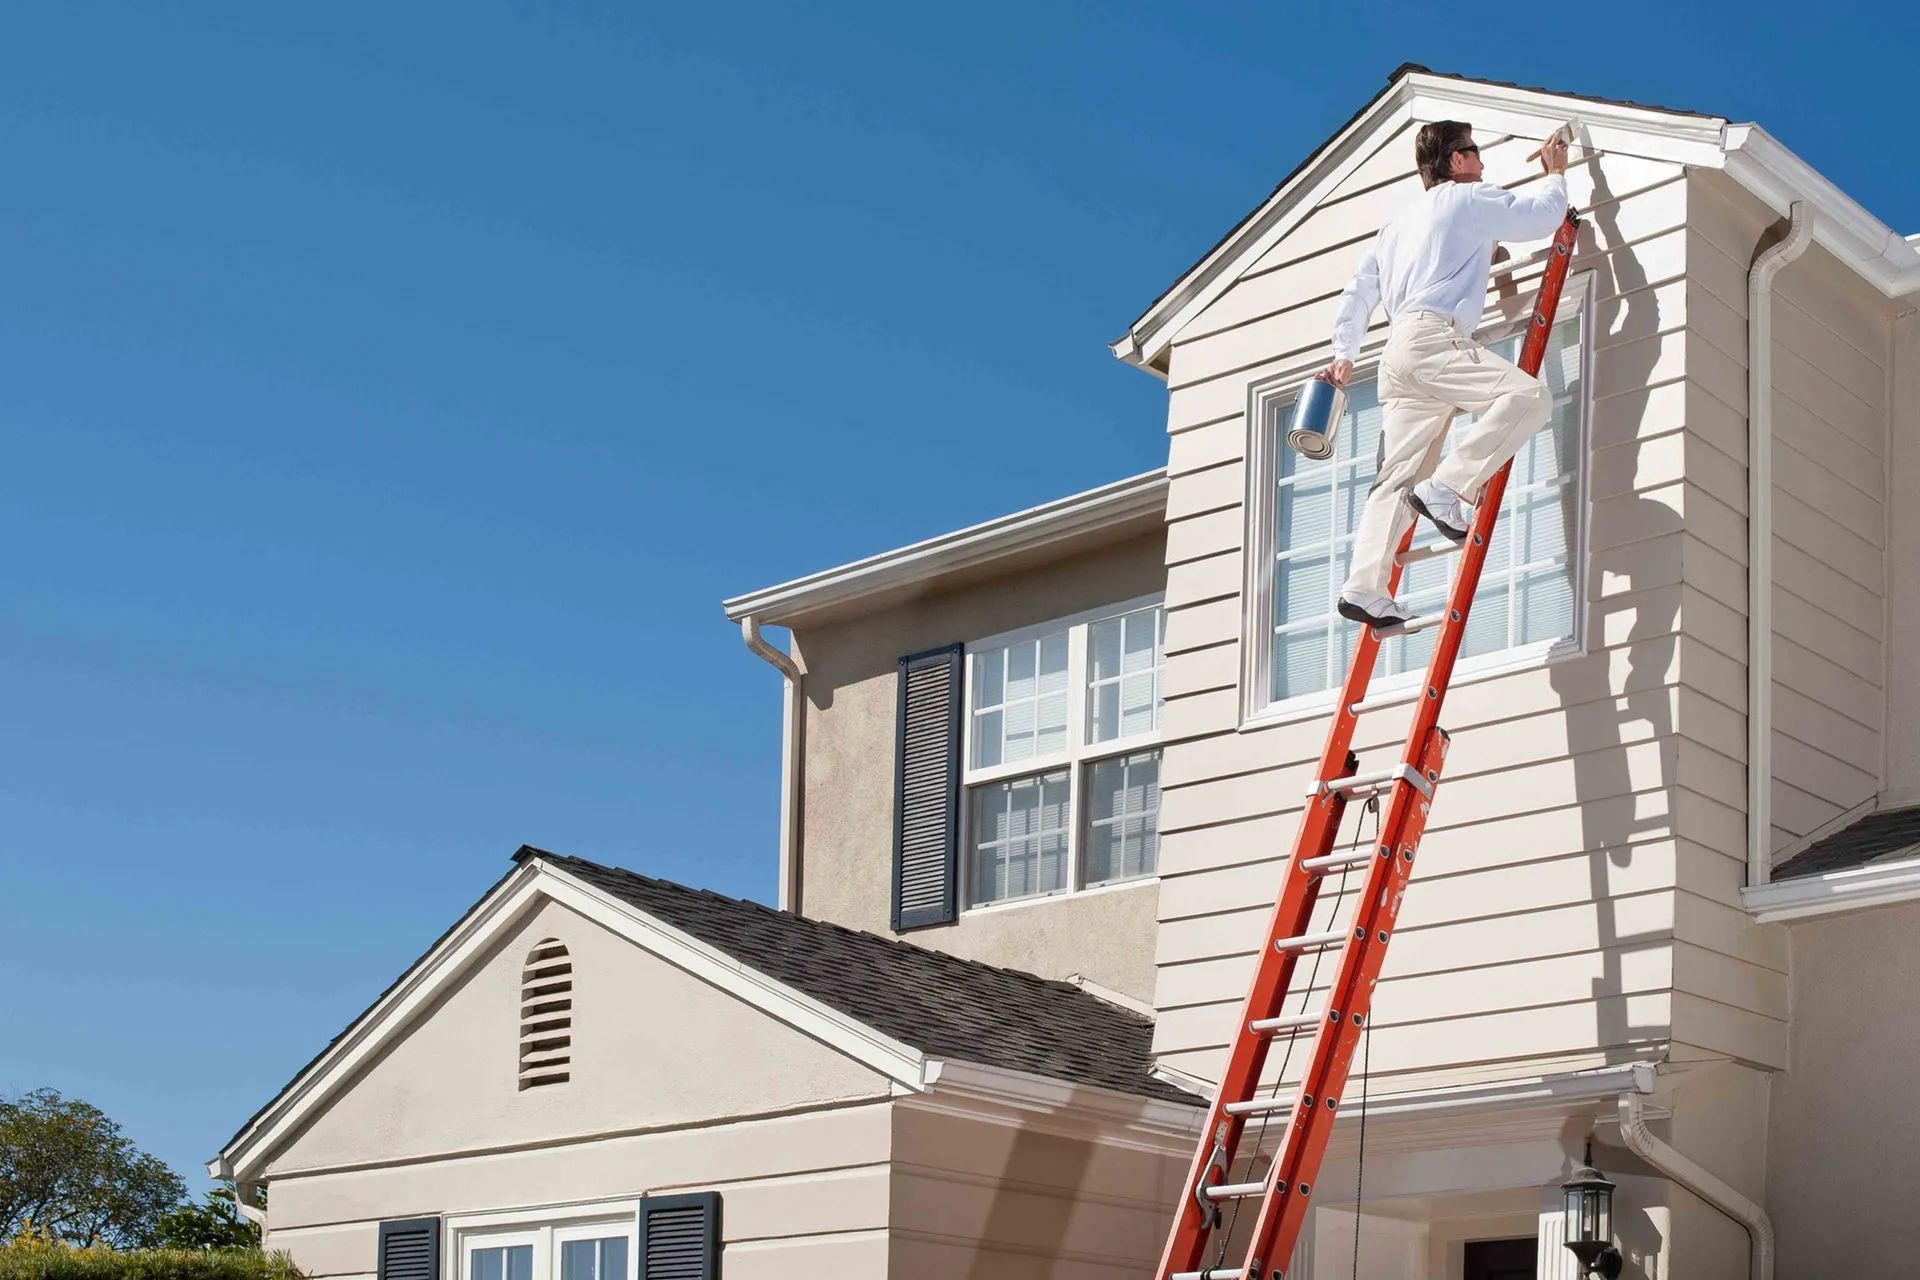 a man on a ladder is painting the side of a house